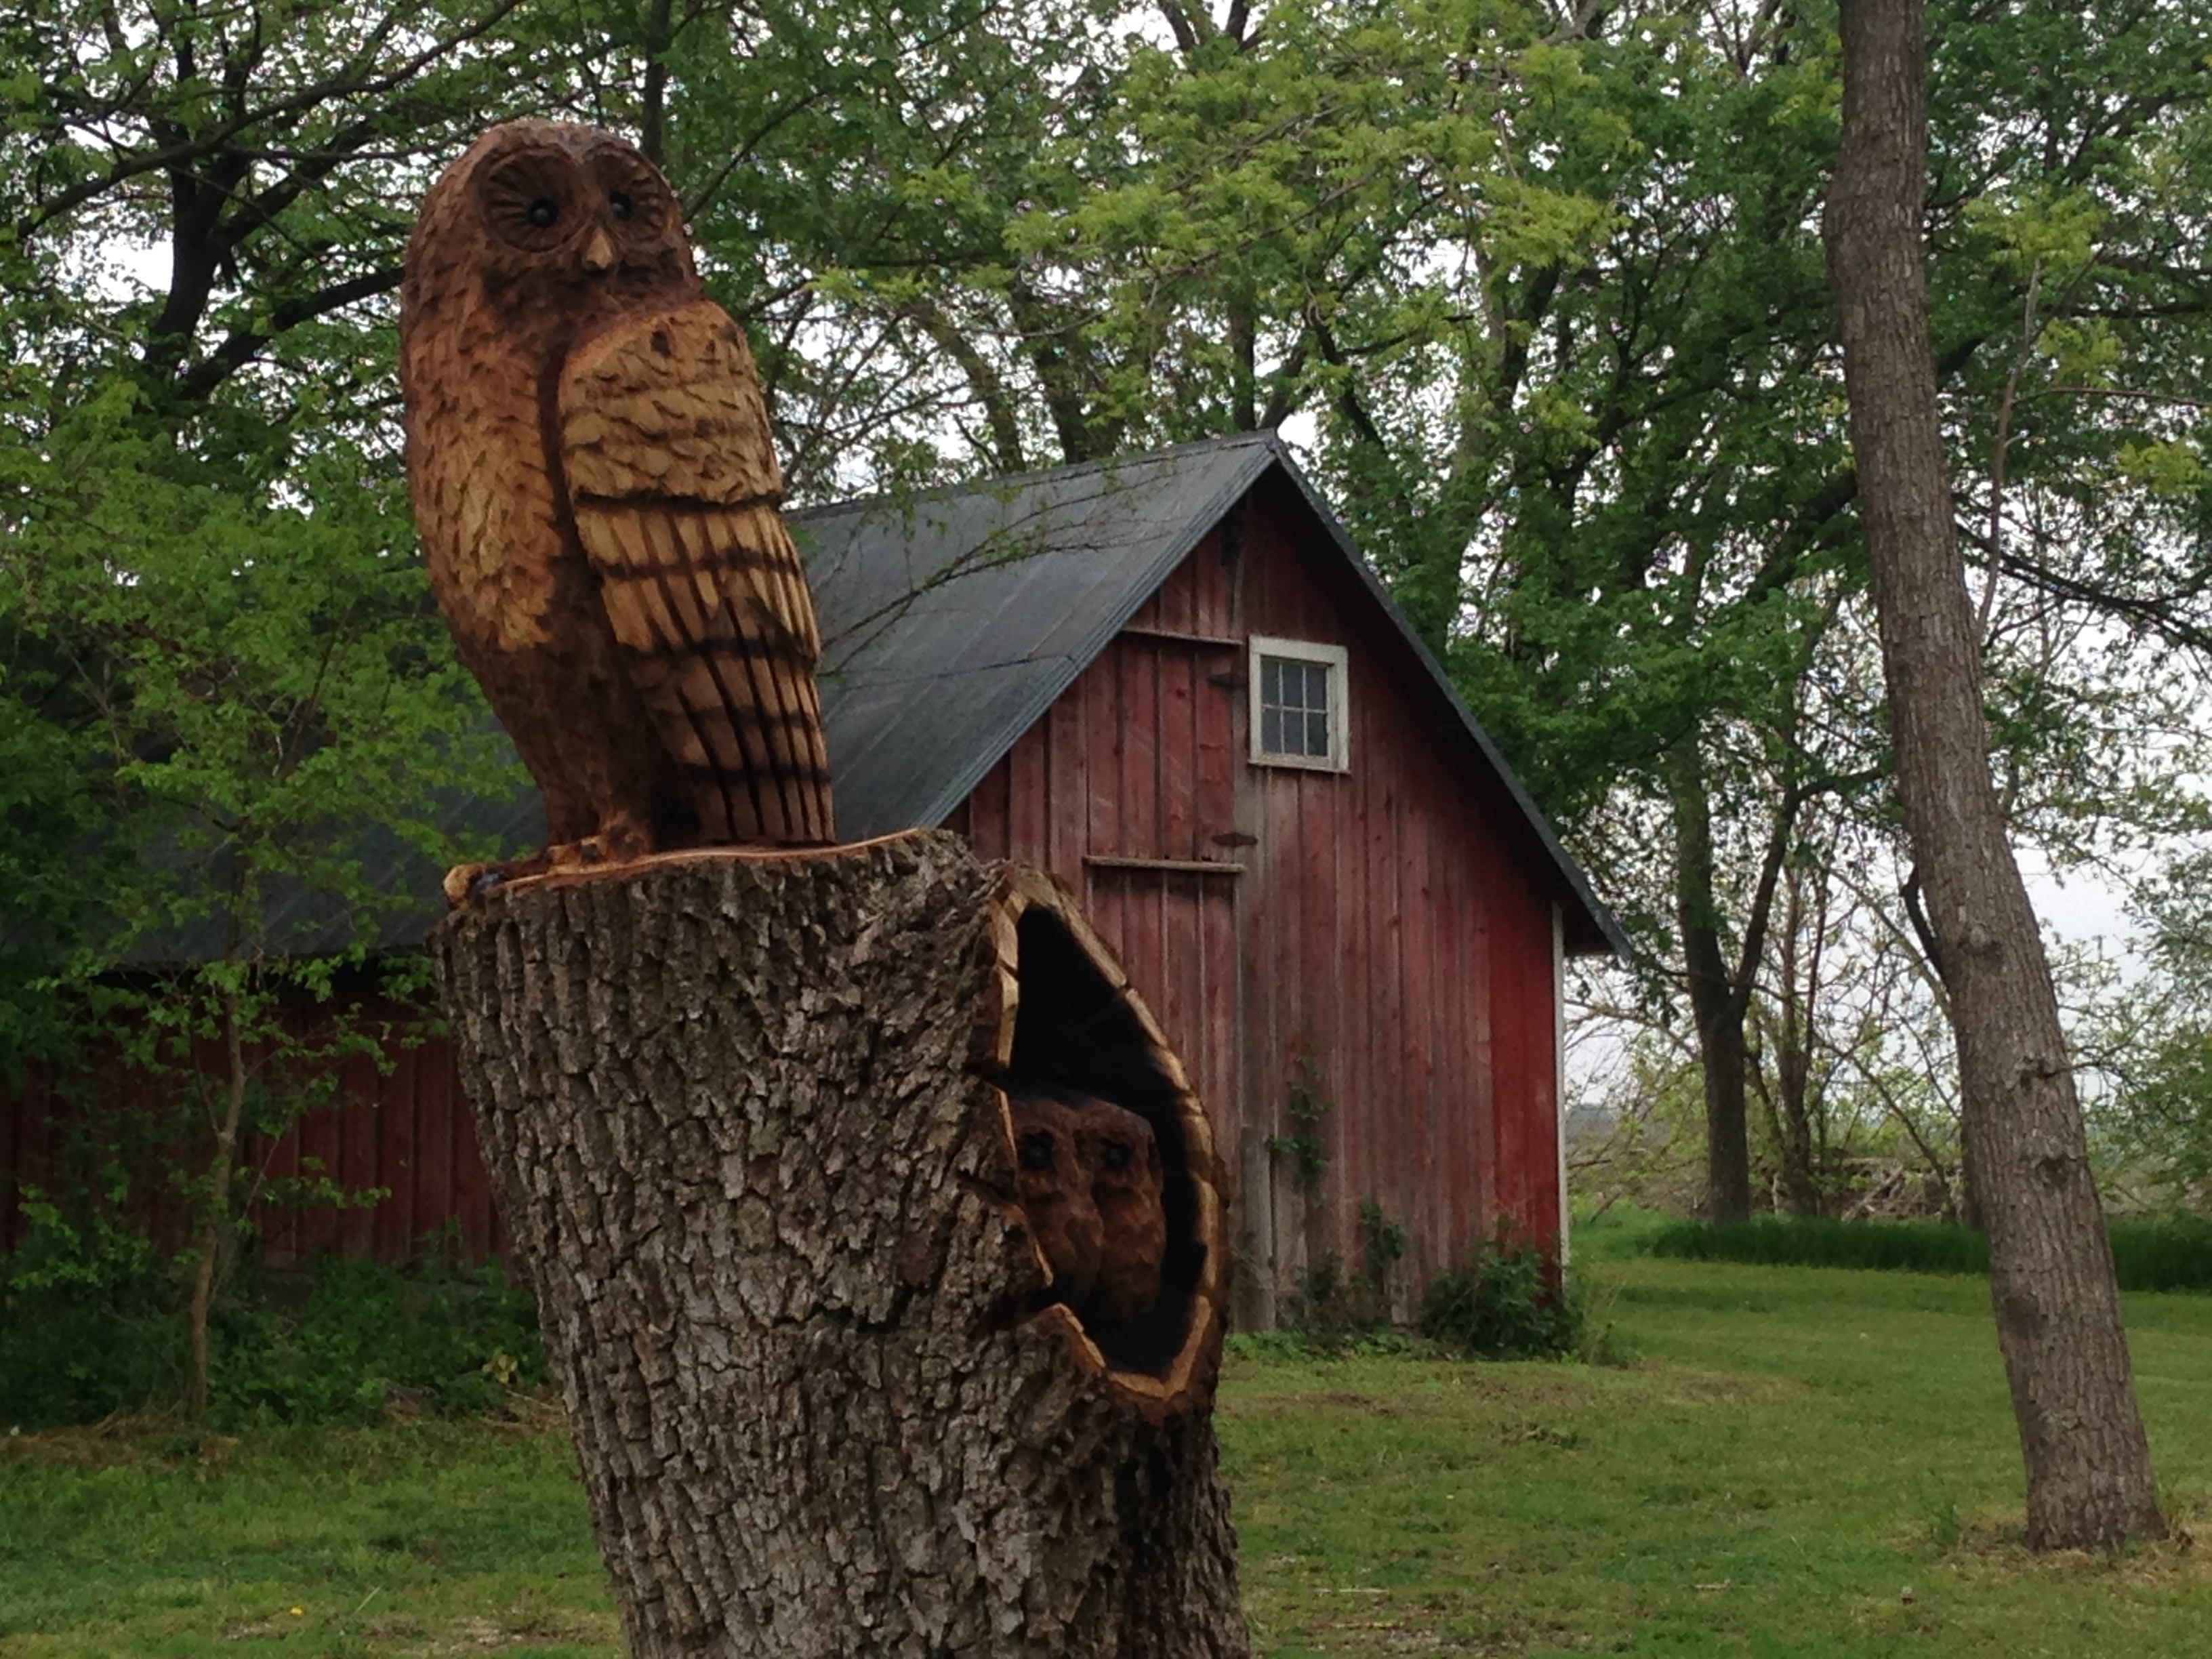 Image of a tree stump that is carved into an owl with a dark red wooden shed in the background.